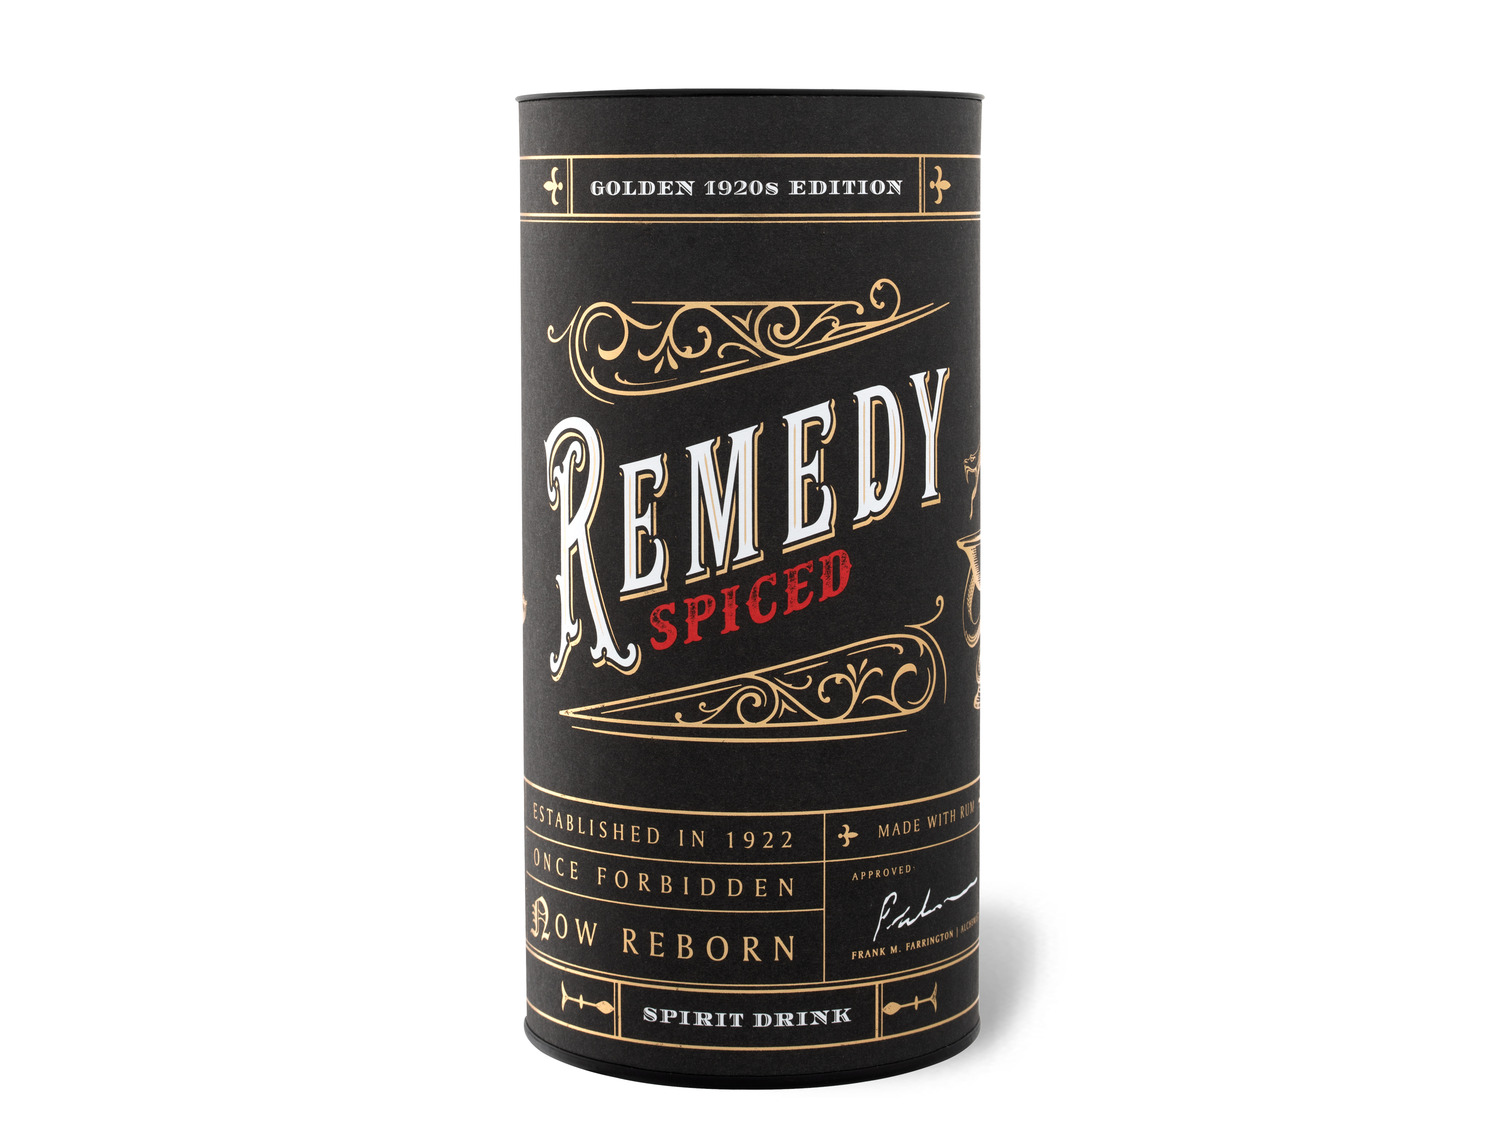 1920\'s Golden Ge… Edition mit Spiced Remedy (Rum-Basis)